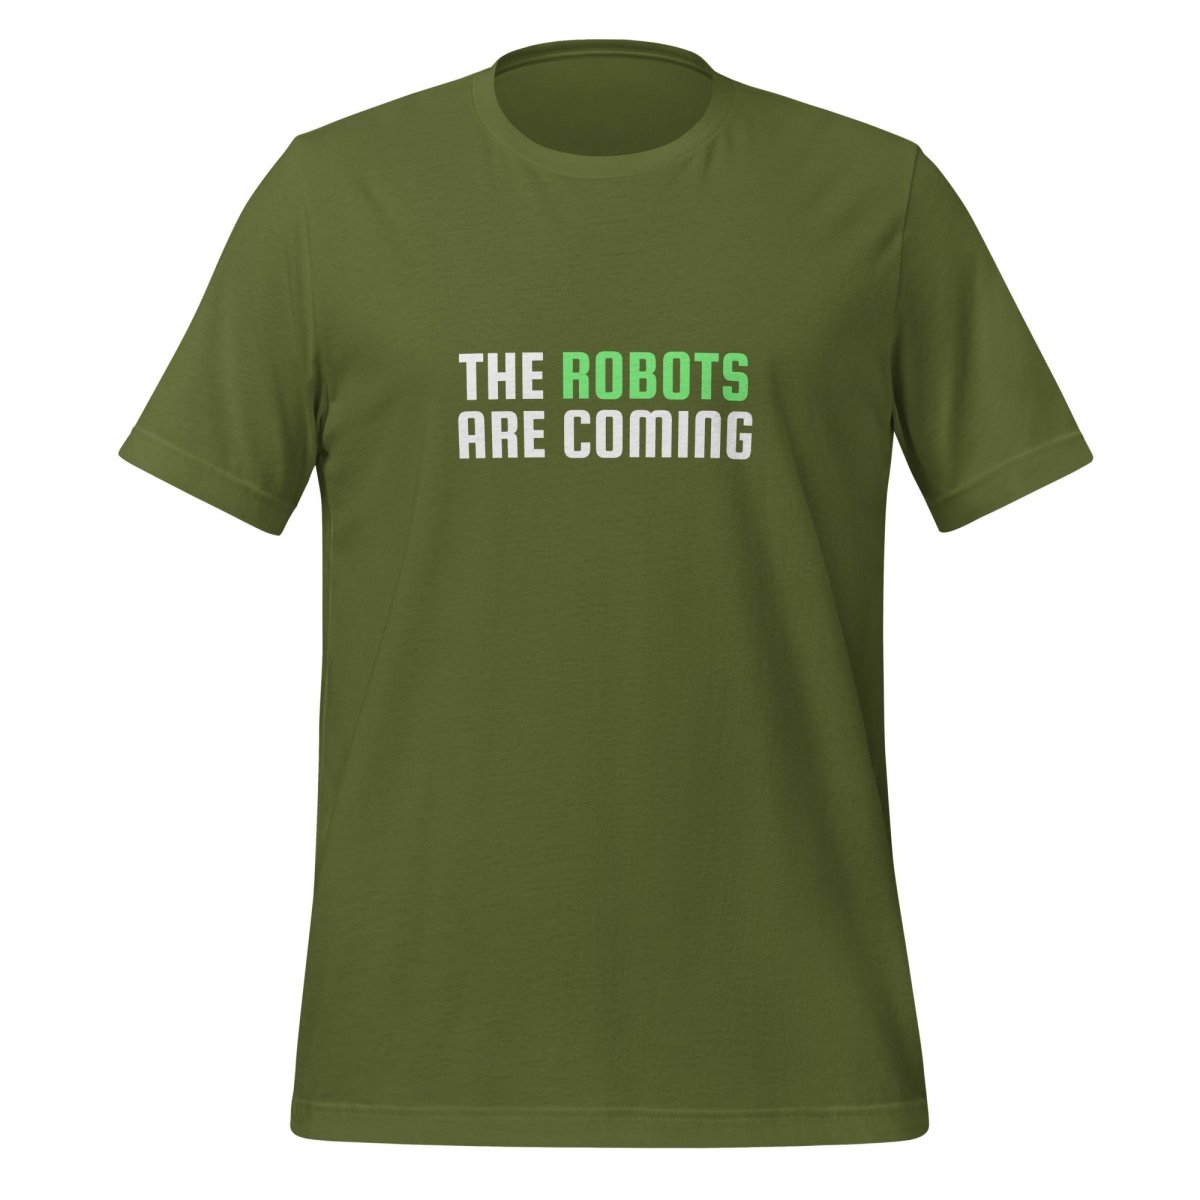 The Robots Are Coming (Green) T - Shirt 2 (unisex) - Olive - AI Store